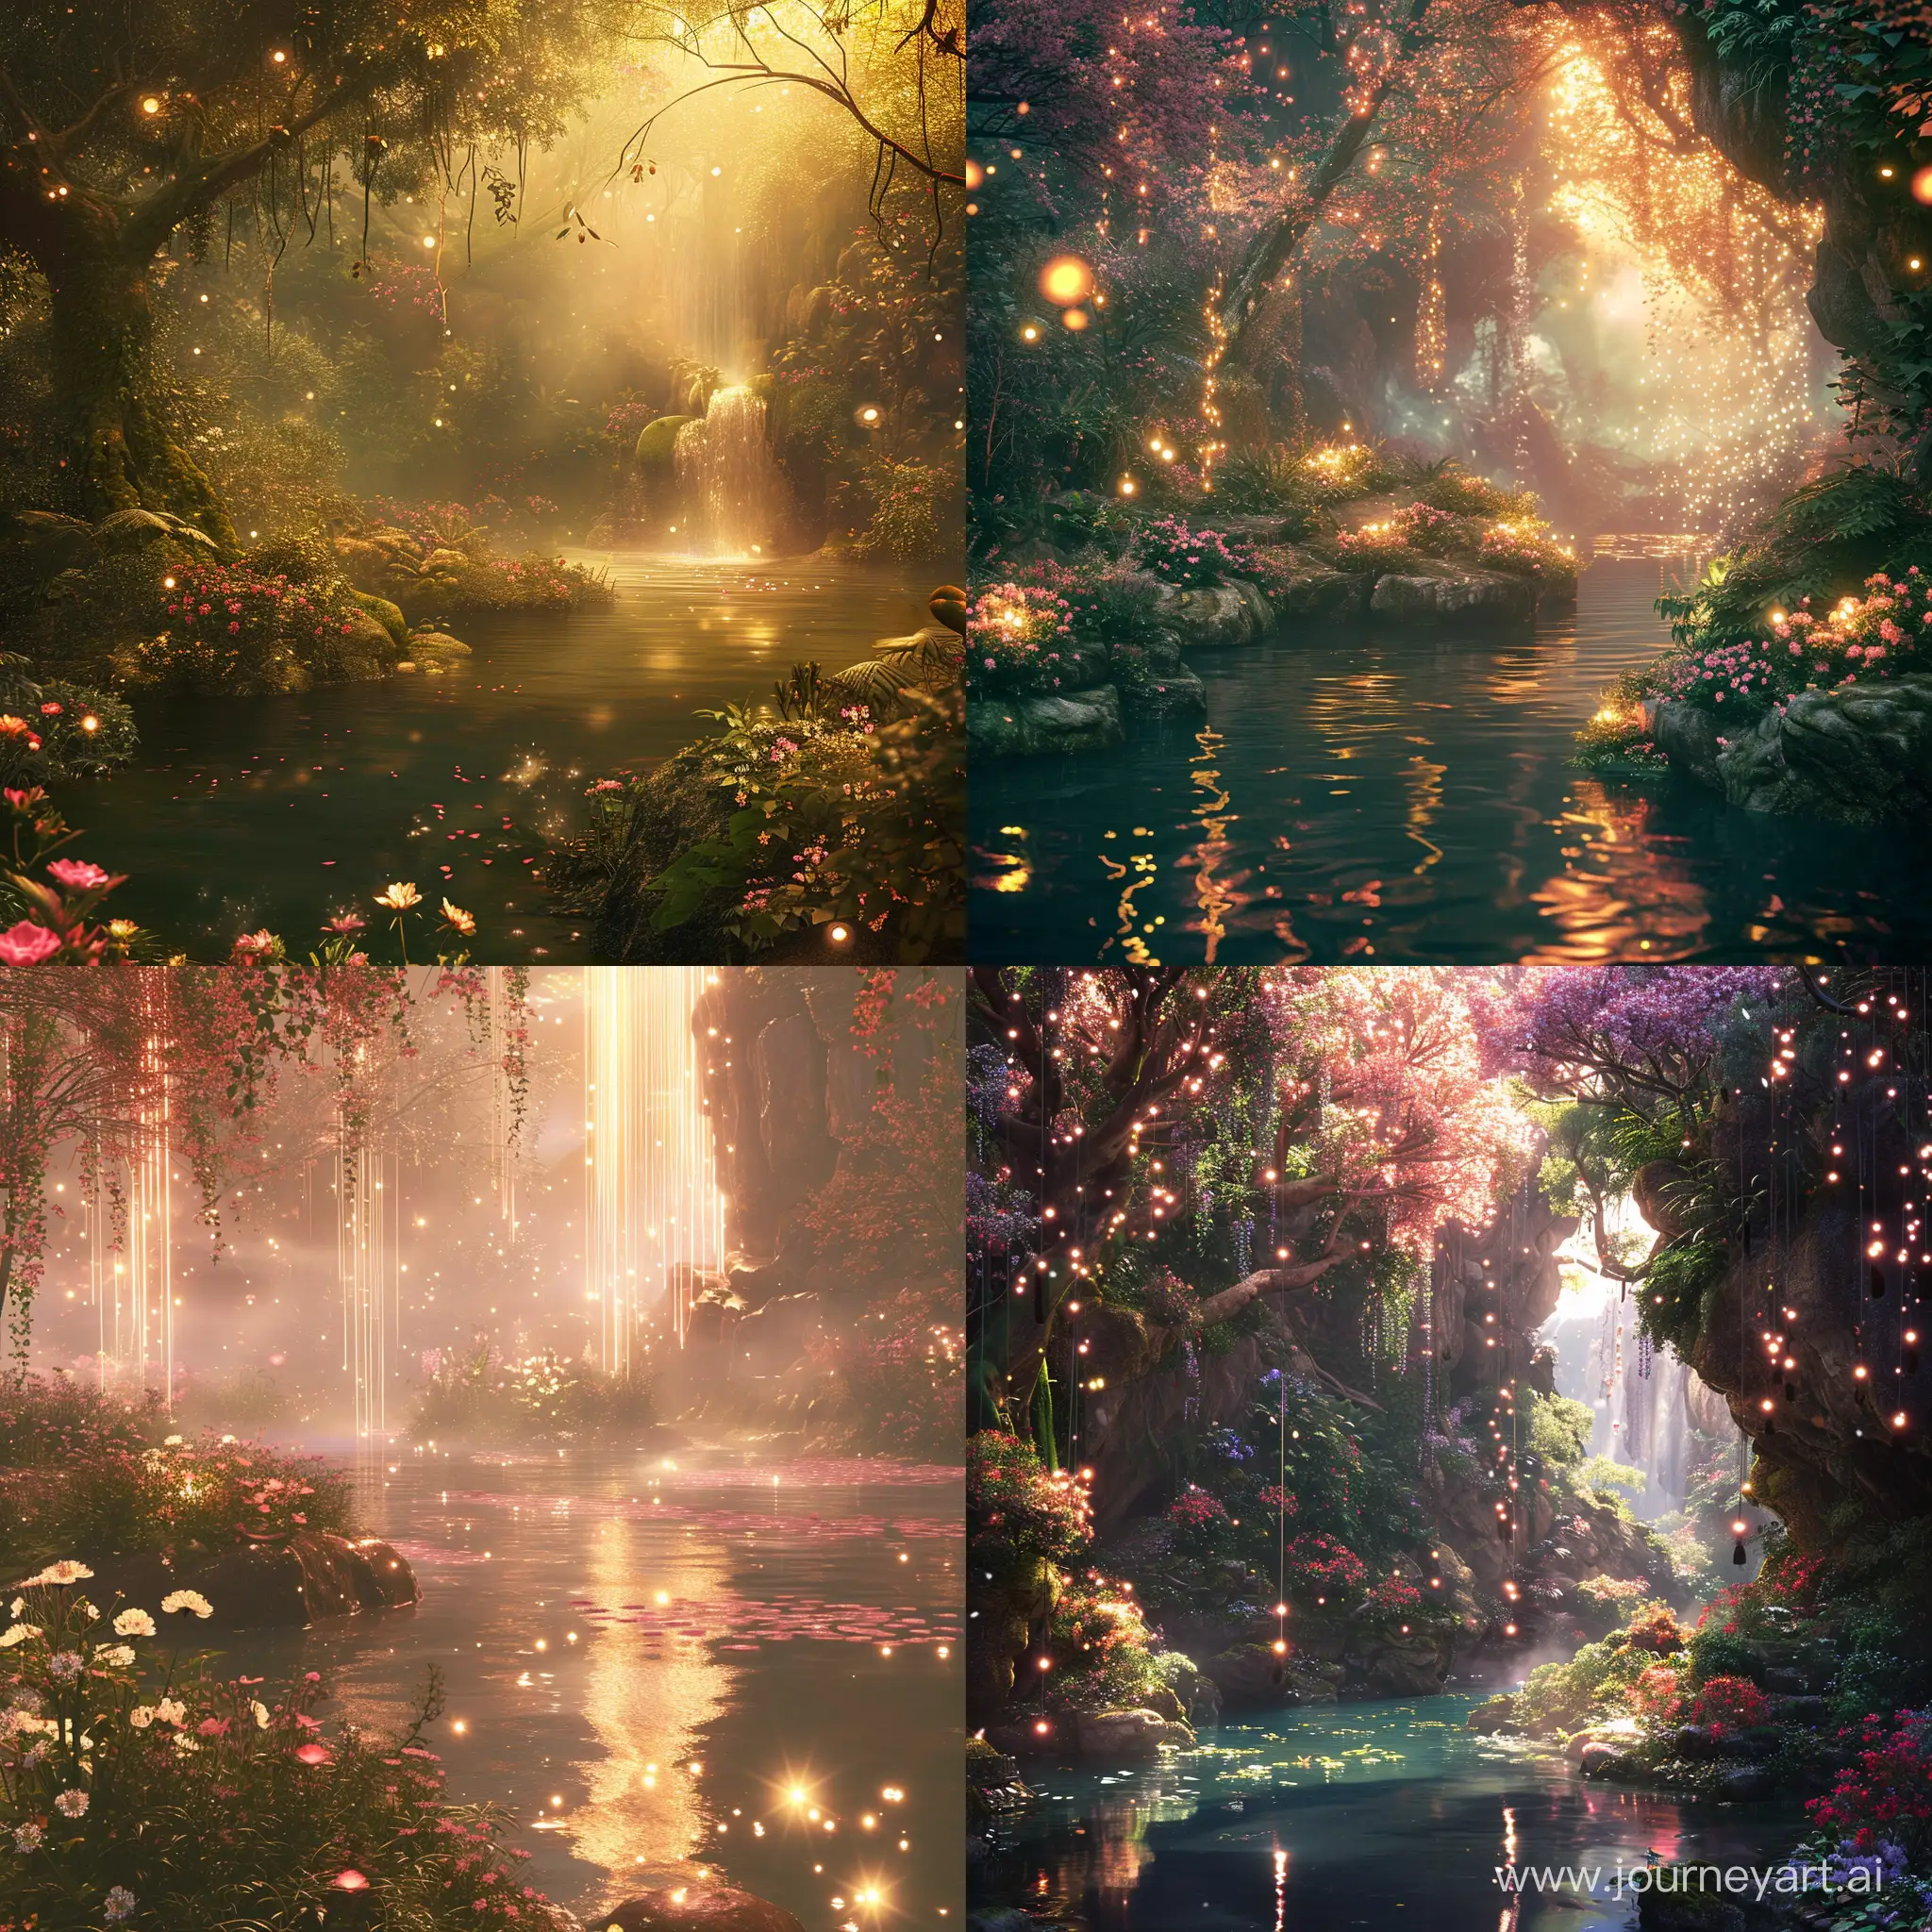 Create an image that captures the essence of an Eastern Eden, a mystical and beautiful paradise, in a realistic quality. The scene is set in a lush natural landscape, with tranquil rivers, blooming flowers, and enchanting light effects. The overall atmosphere is serene and inviting, offering a sense of peace and awe to anyone who beholds it. The image is rich in detail, with vivid colors and textures that highlight the beauty and mystique of this ideal realm. The quality is realistic, emphasizing the harmonious blend of natural elements in this tranquil haven.